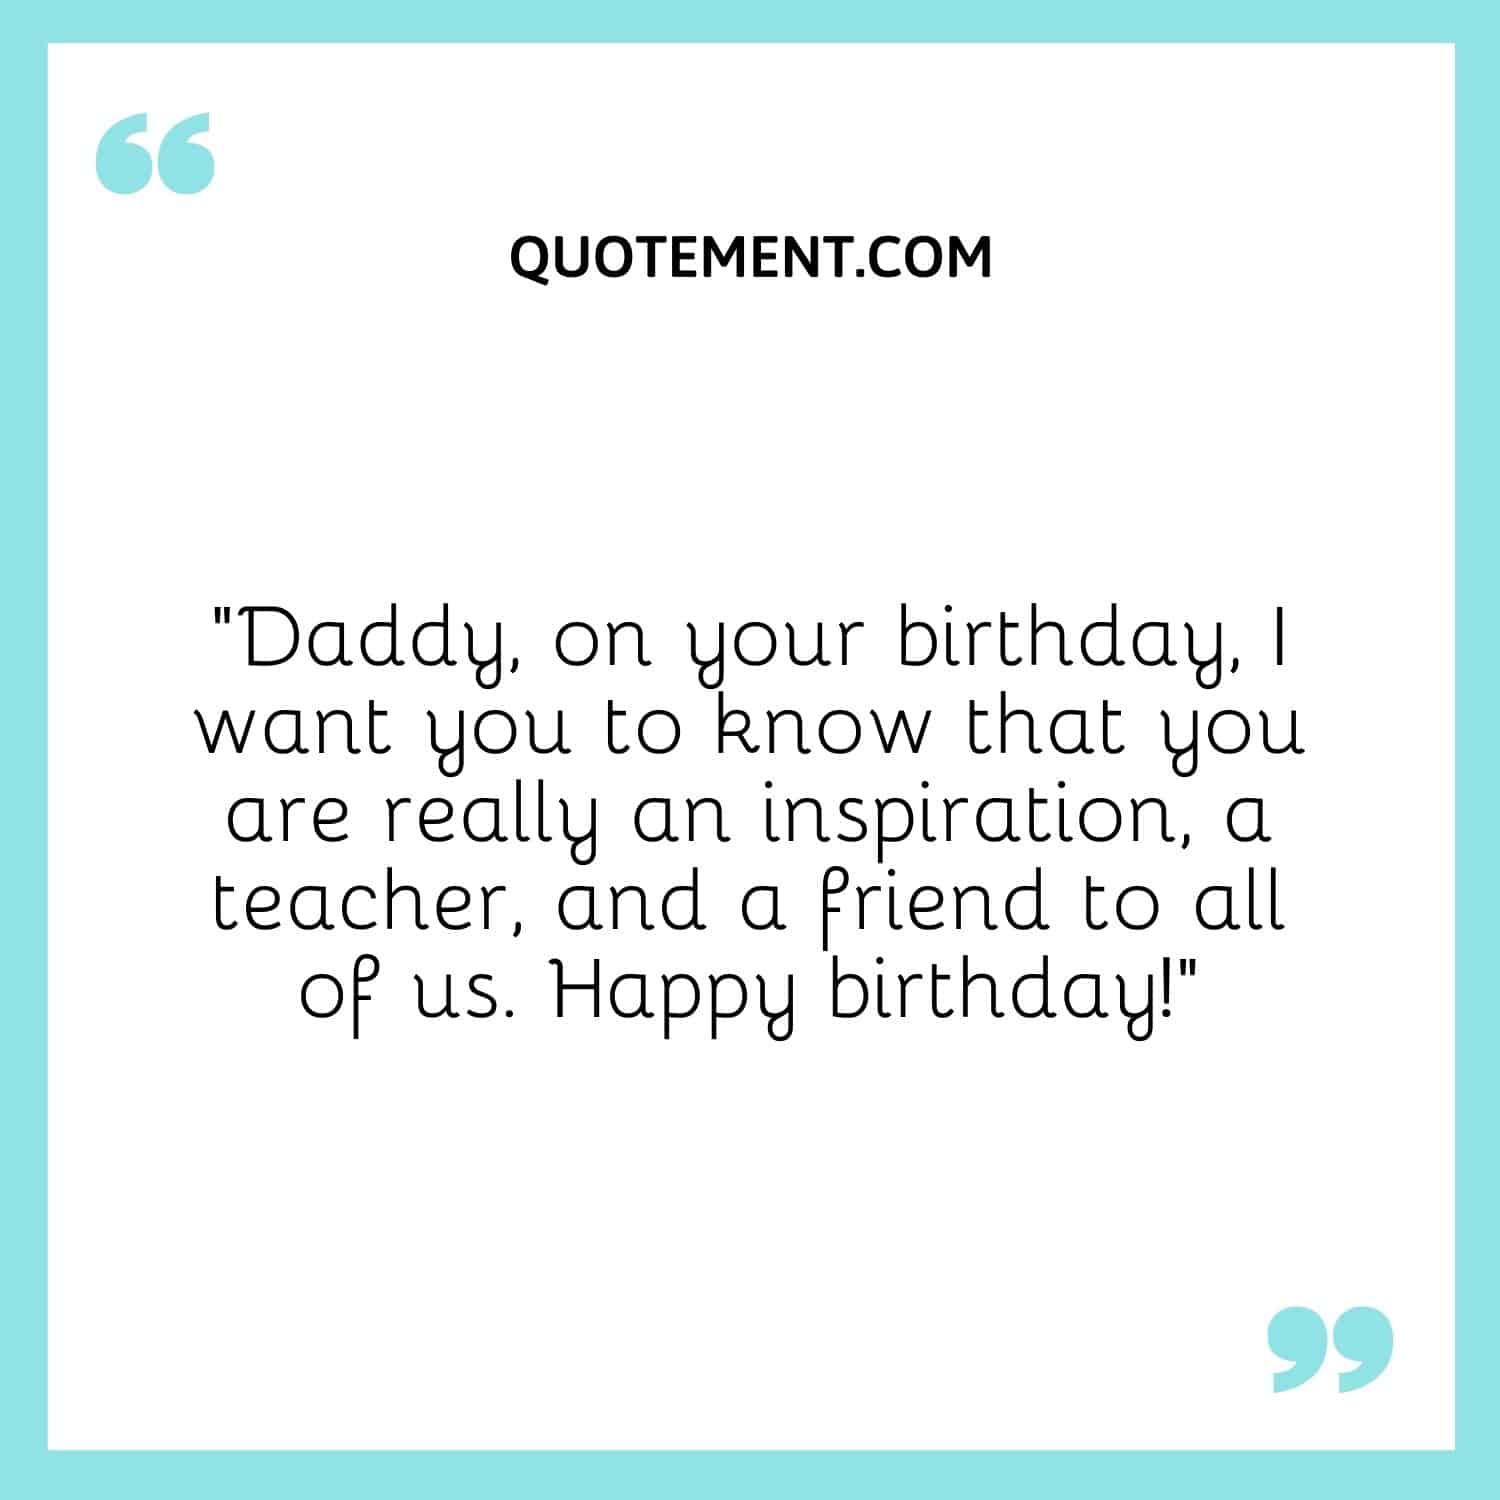 Daddy, on your birthday, I want you to know that you are really an inspiration